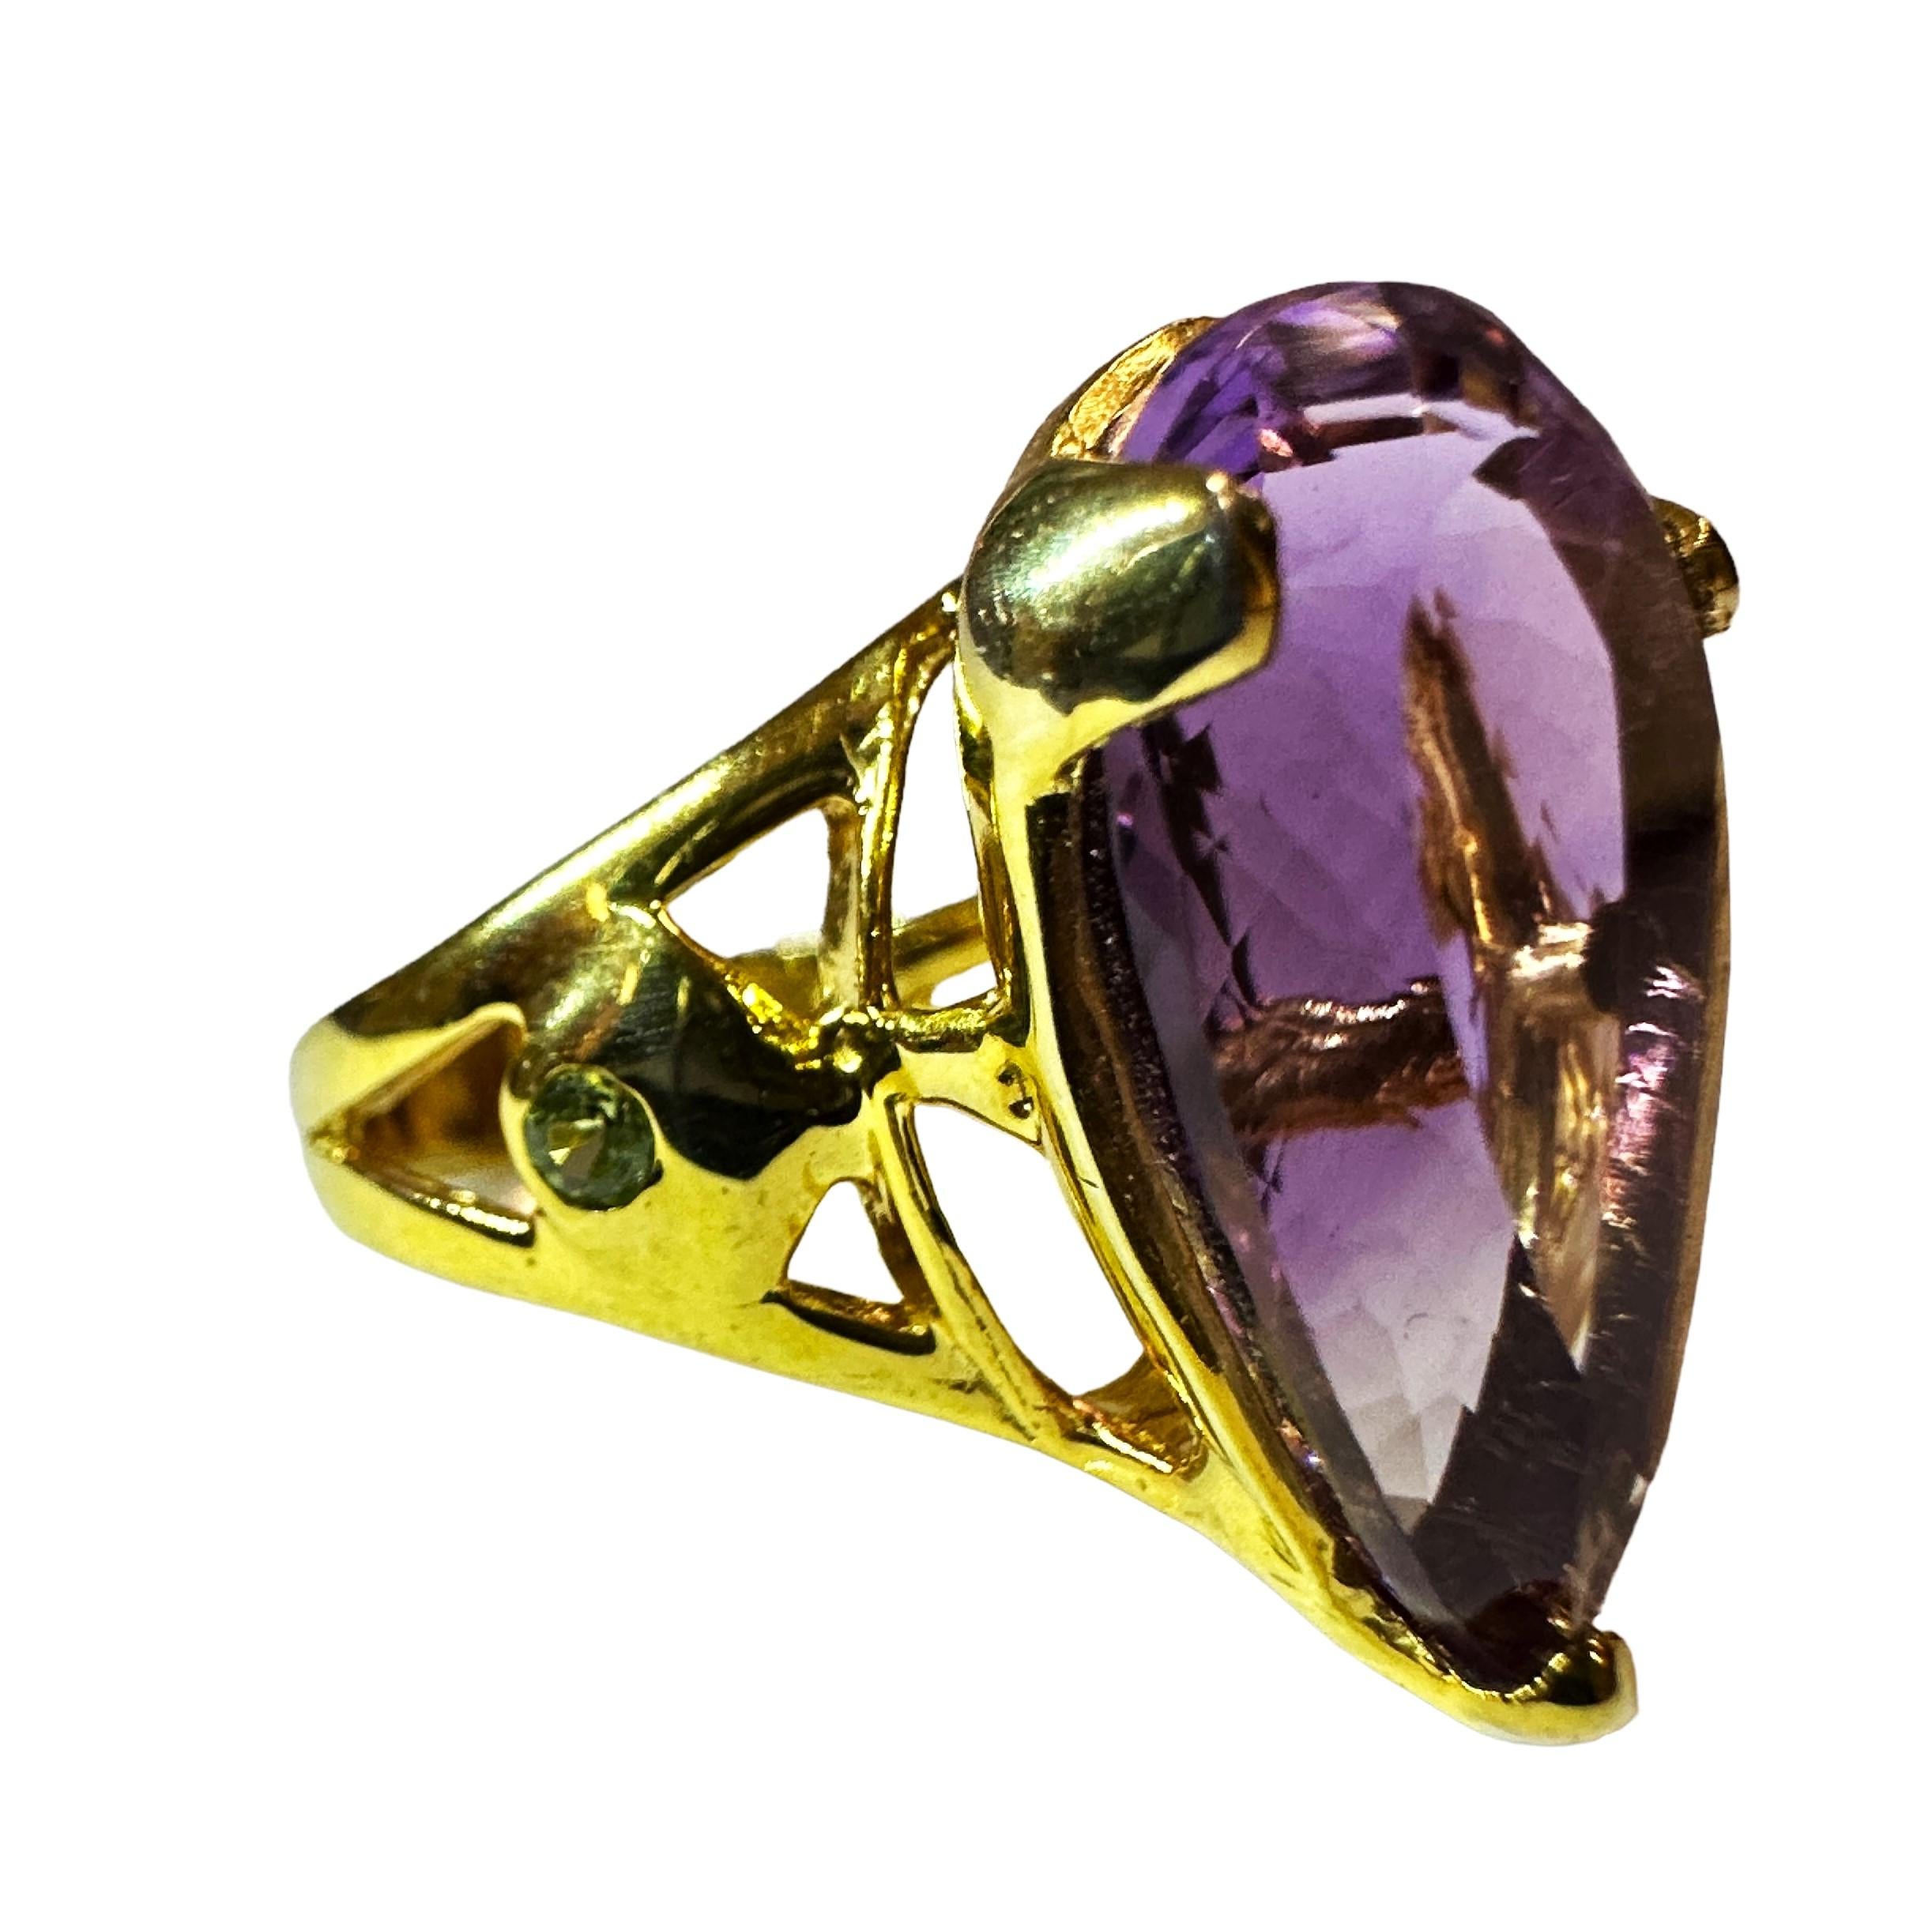 New African 16 Ct Purple Amethyst Yellow Gold Plated Sterling Ring Size 7.5 In New Condition For Sale In Eagan, MN